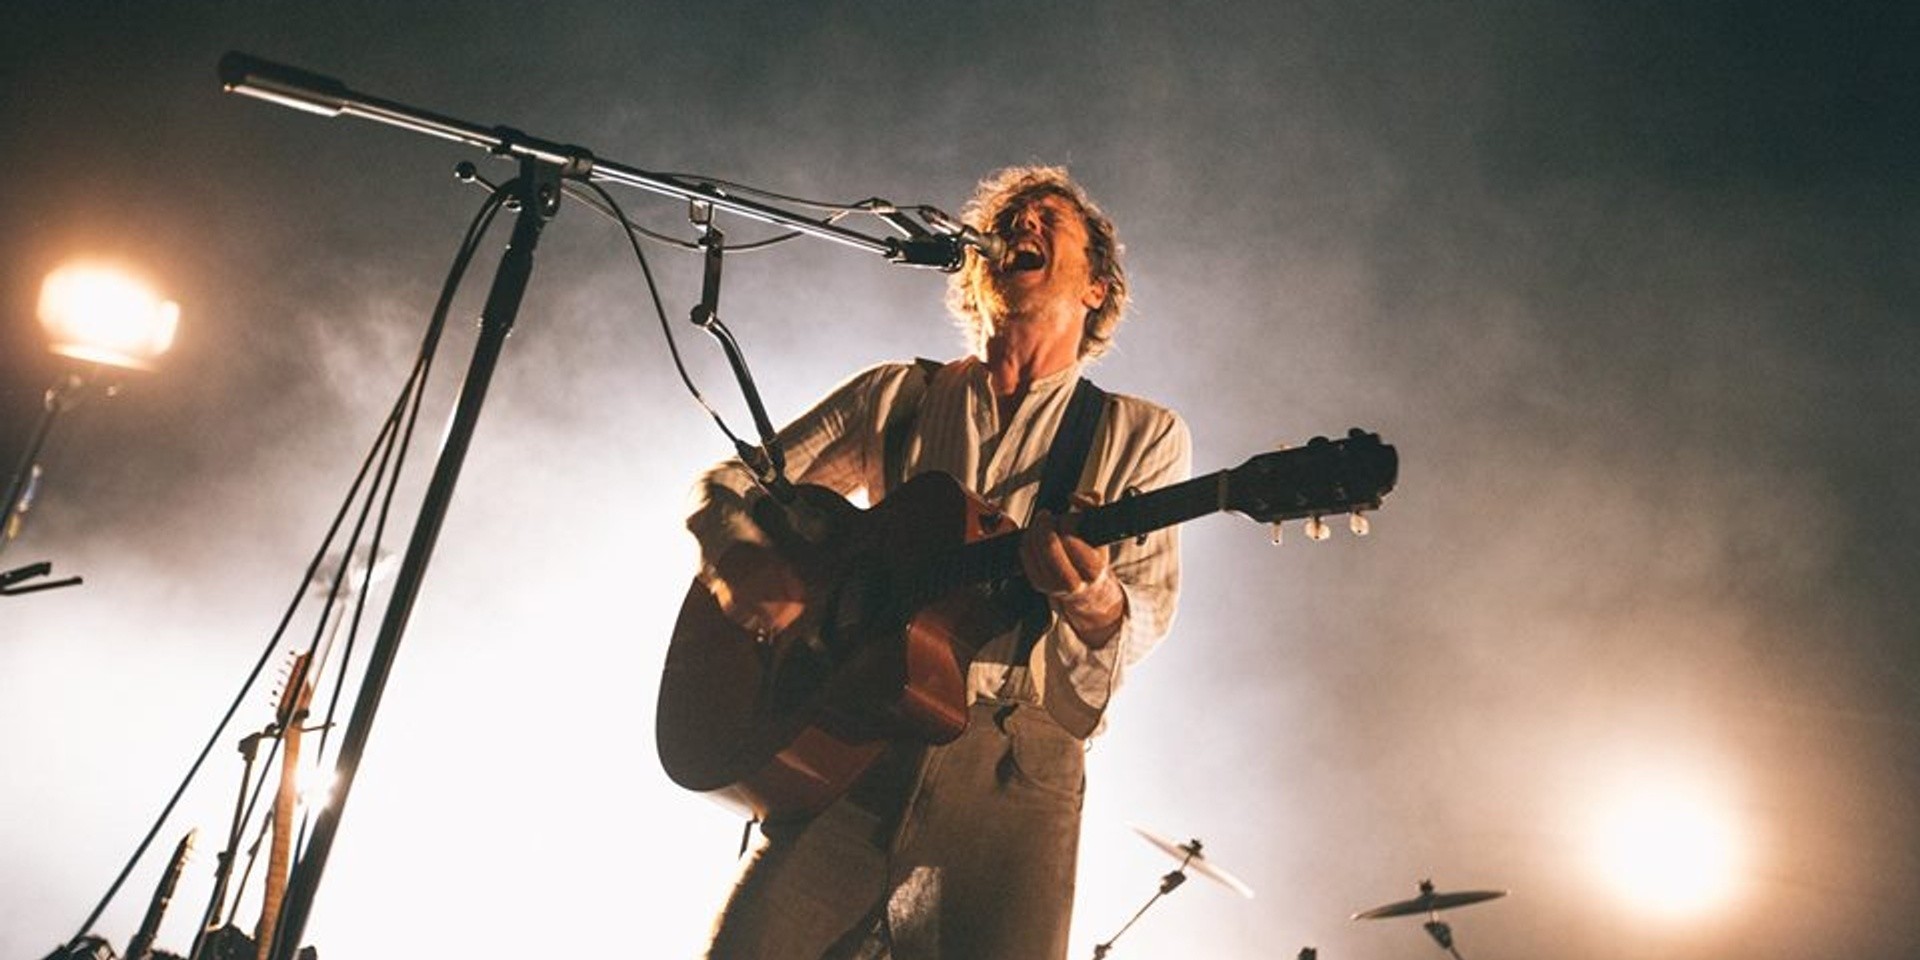 GIG REPORT: Damien Rice stages transcendental, intimate experience in The Star Theatre